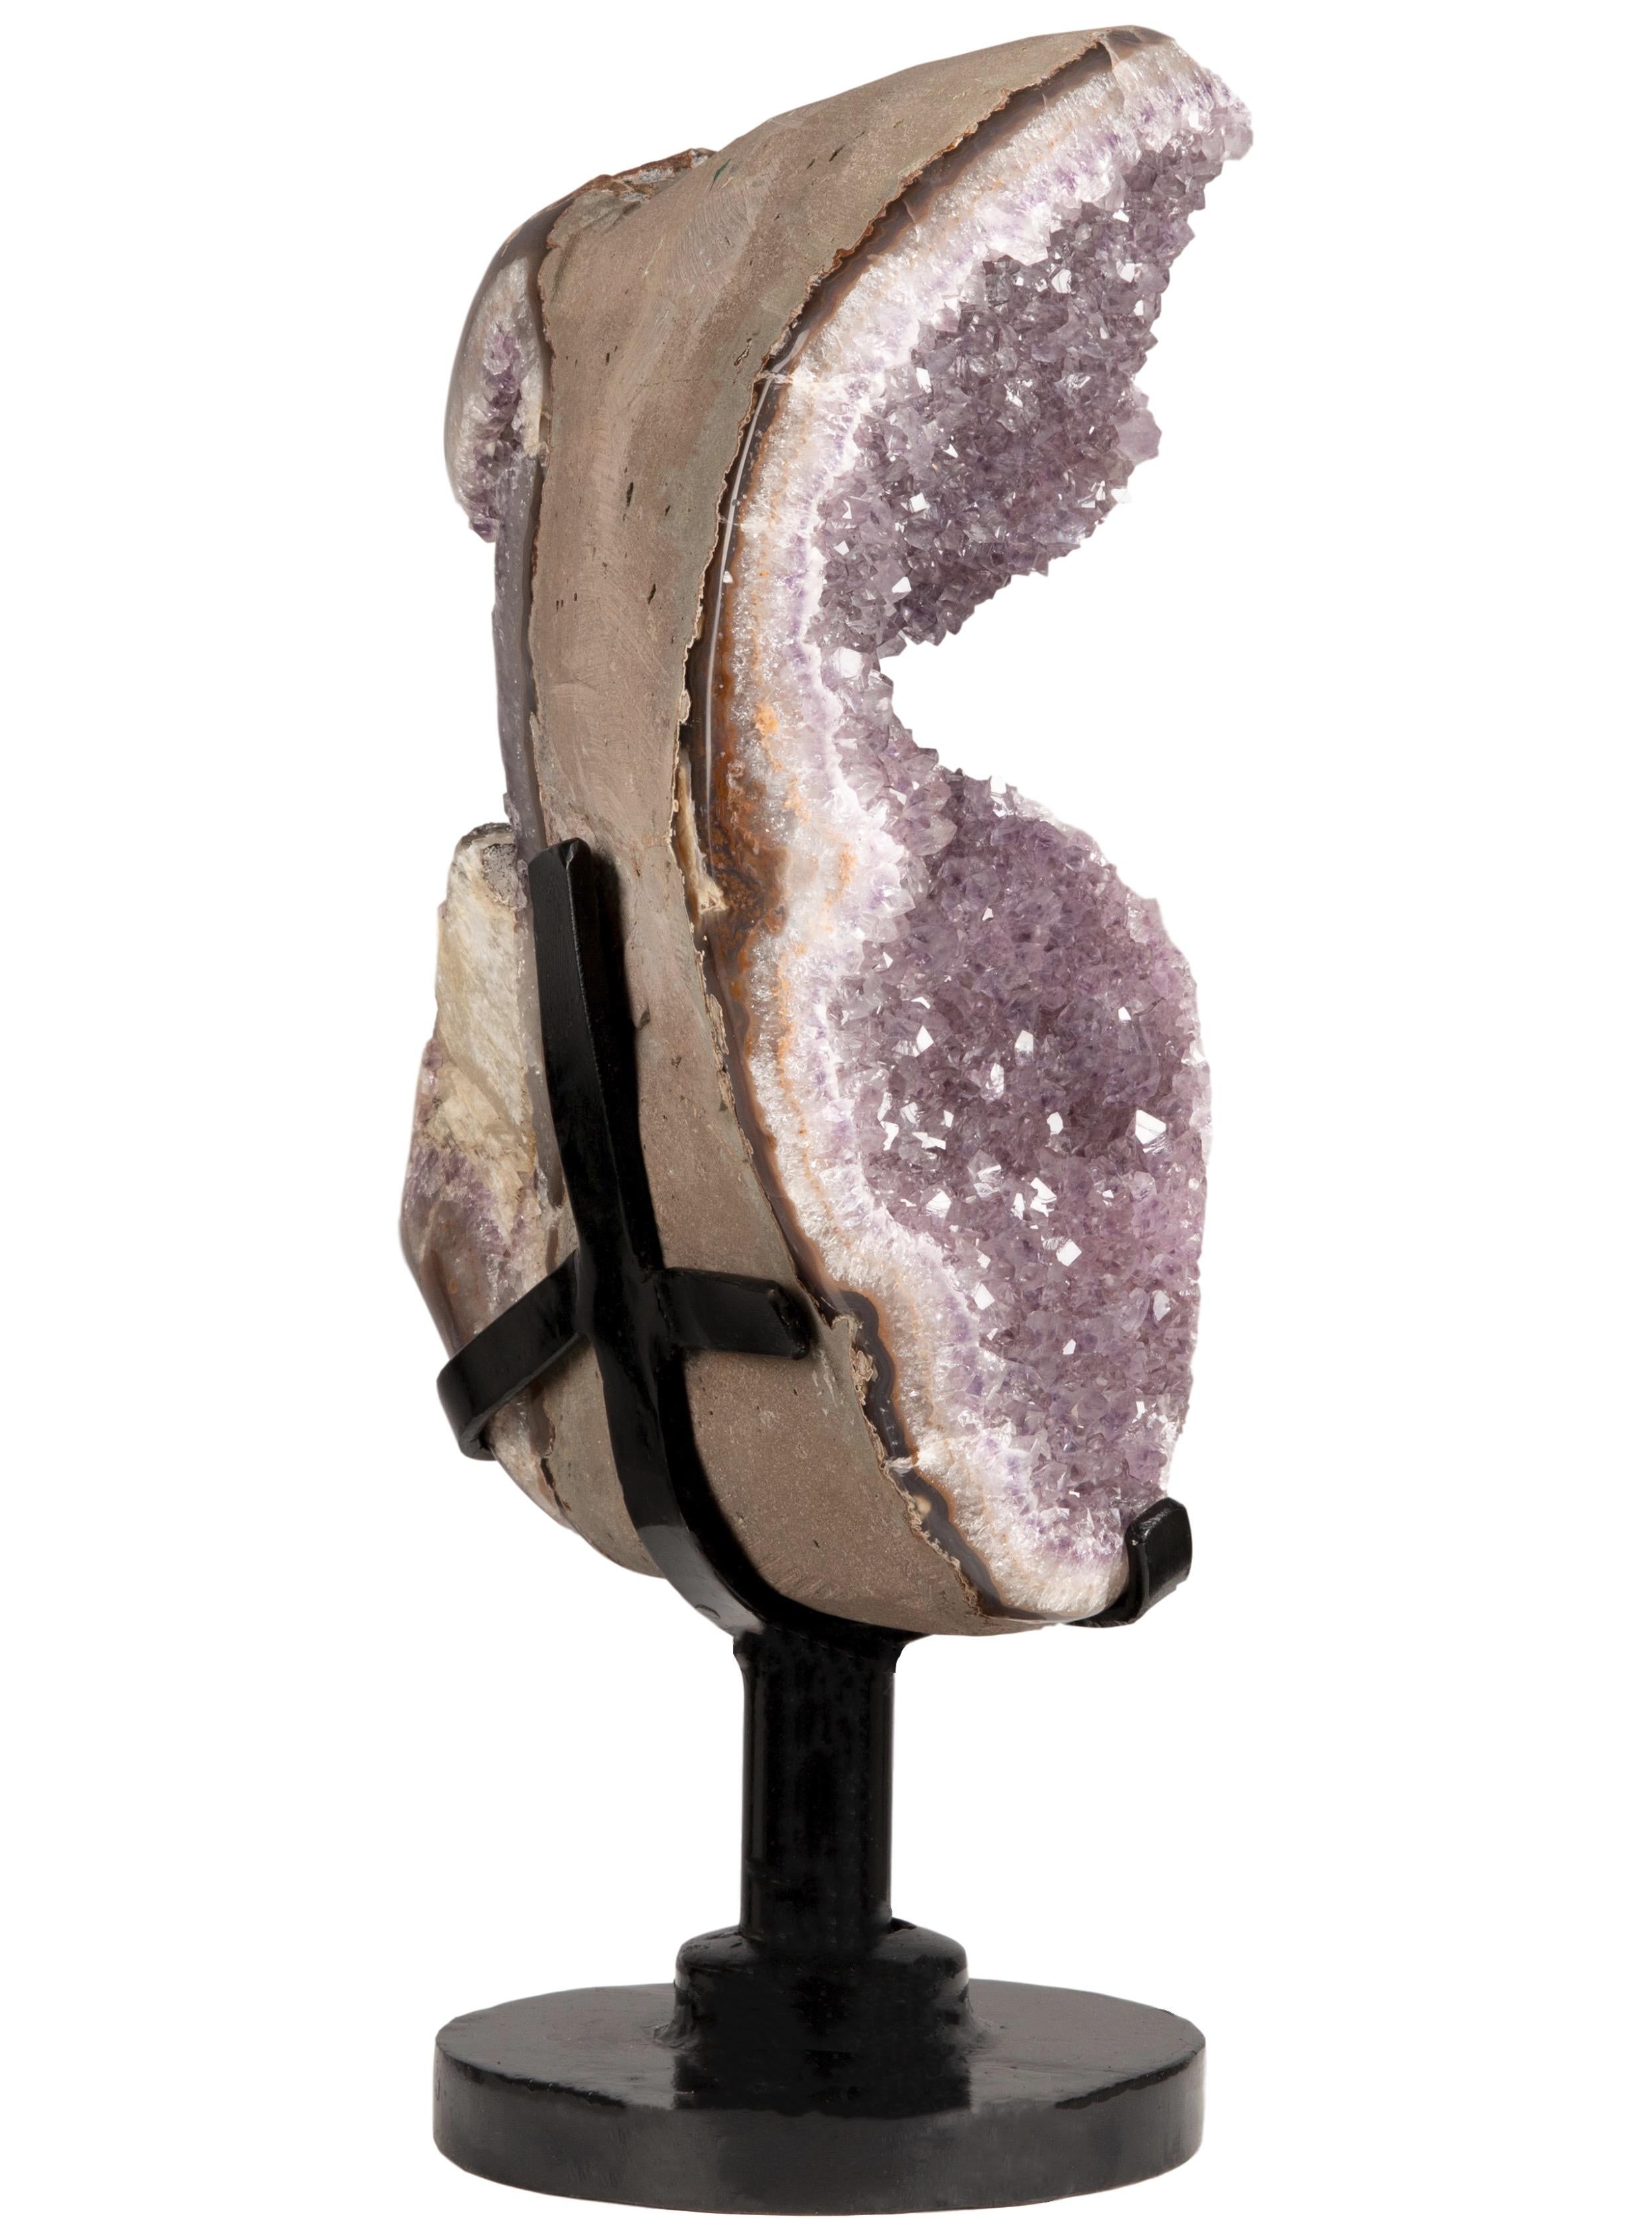 This is a unique geode heart placed in a custom rotating metal stand. Given the structure of this piece, it is possible to rotate and appreciate all the sides equally, giving the viewer an insight into the beautiful process that led to this